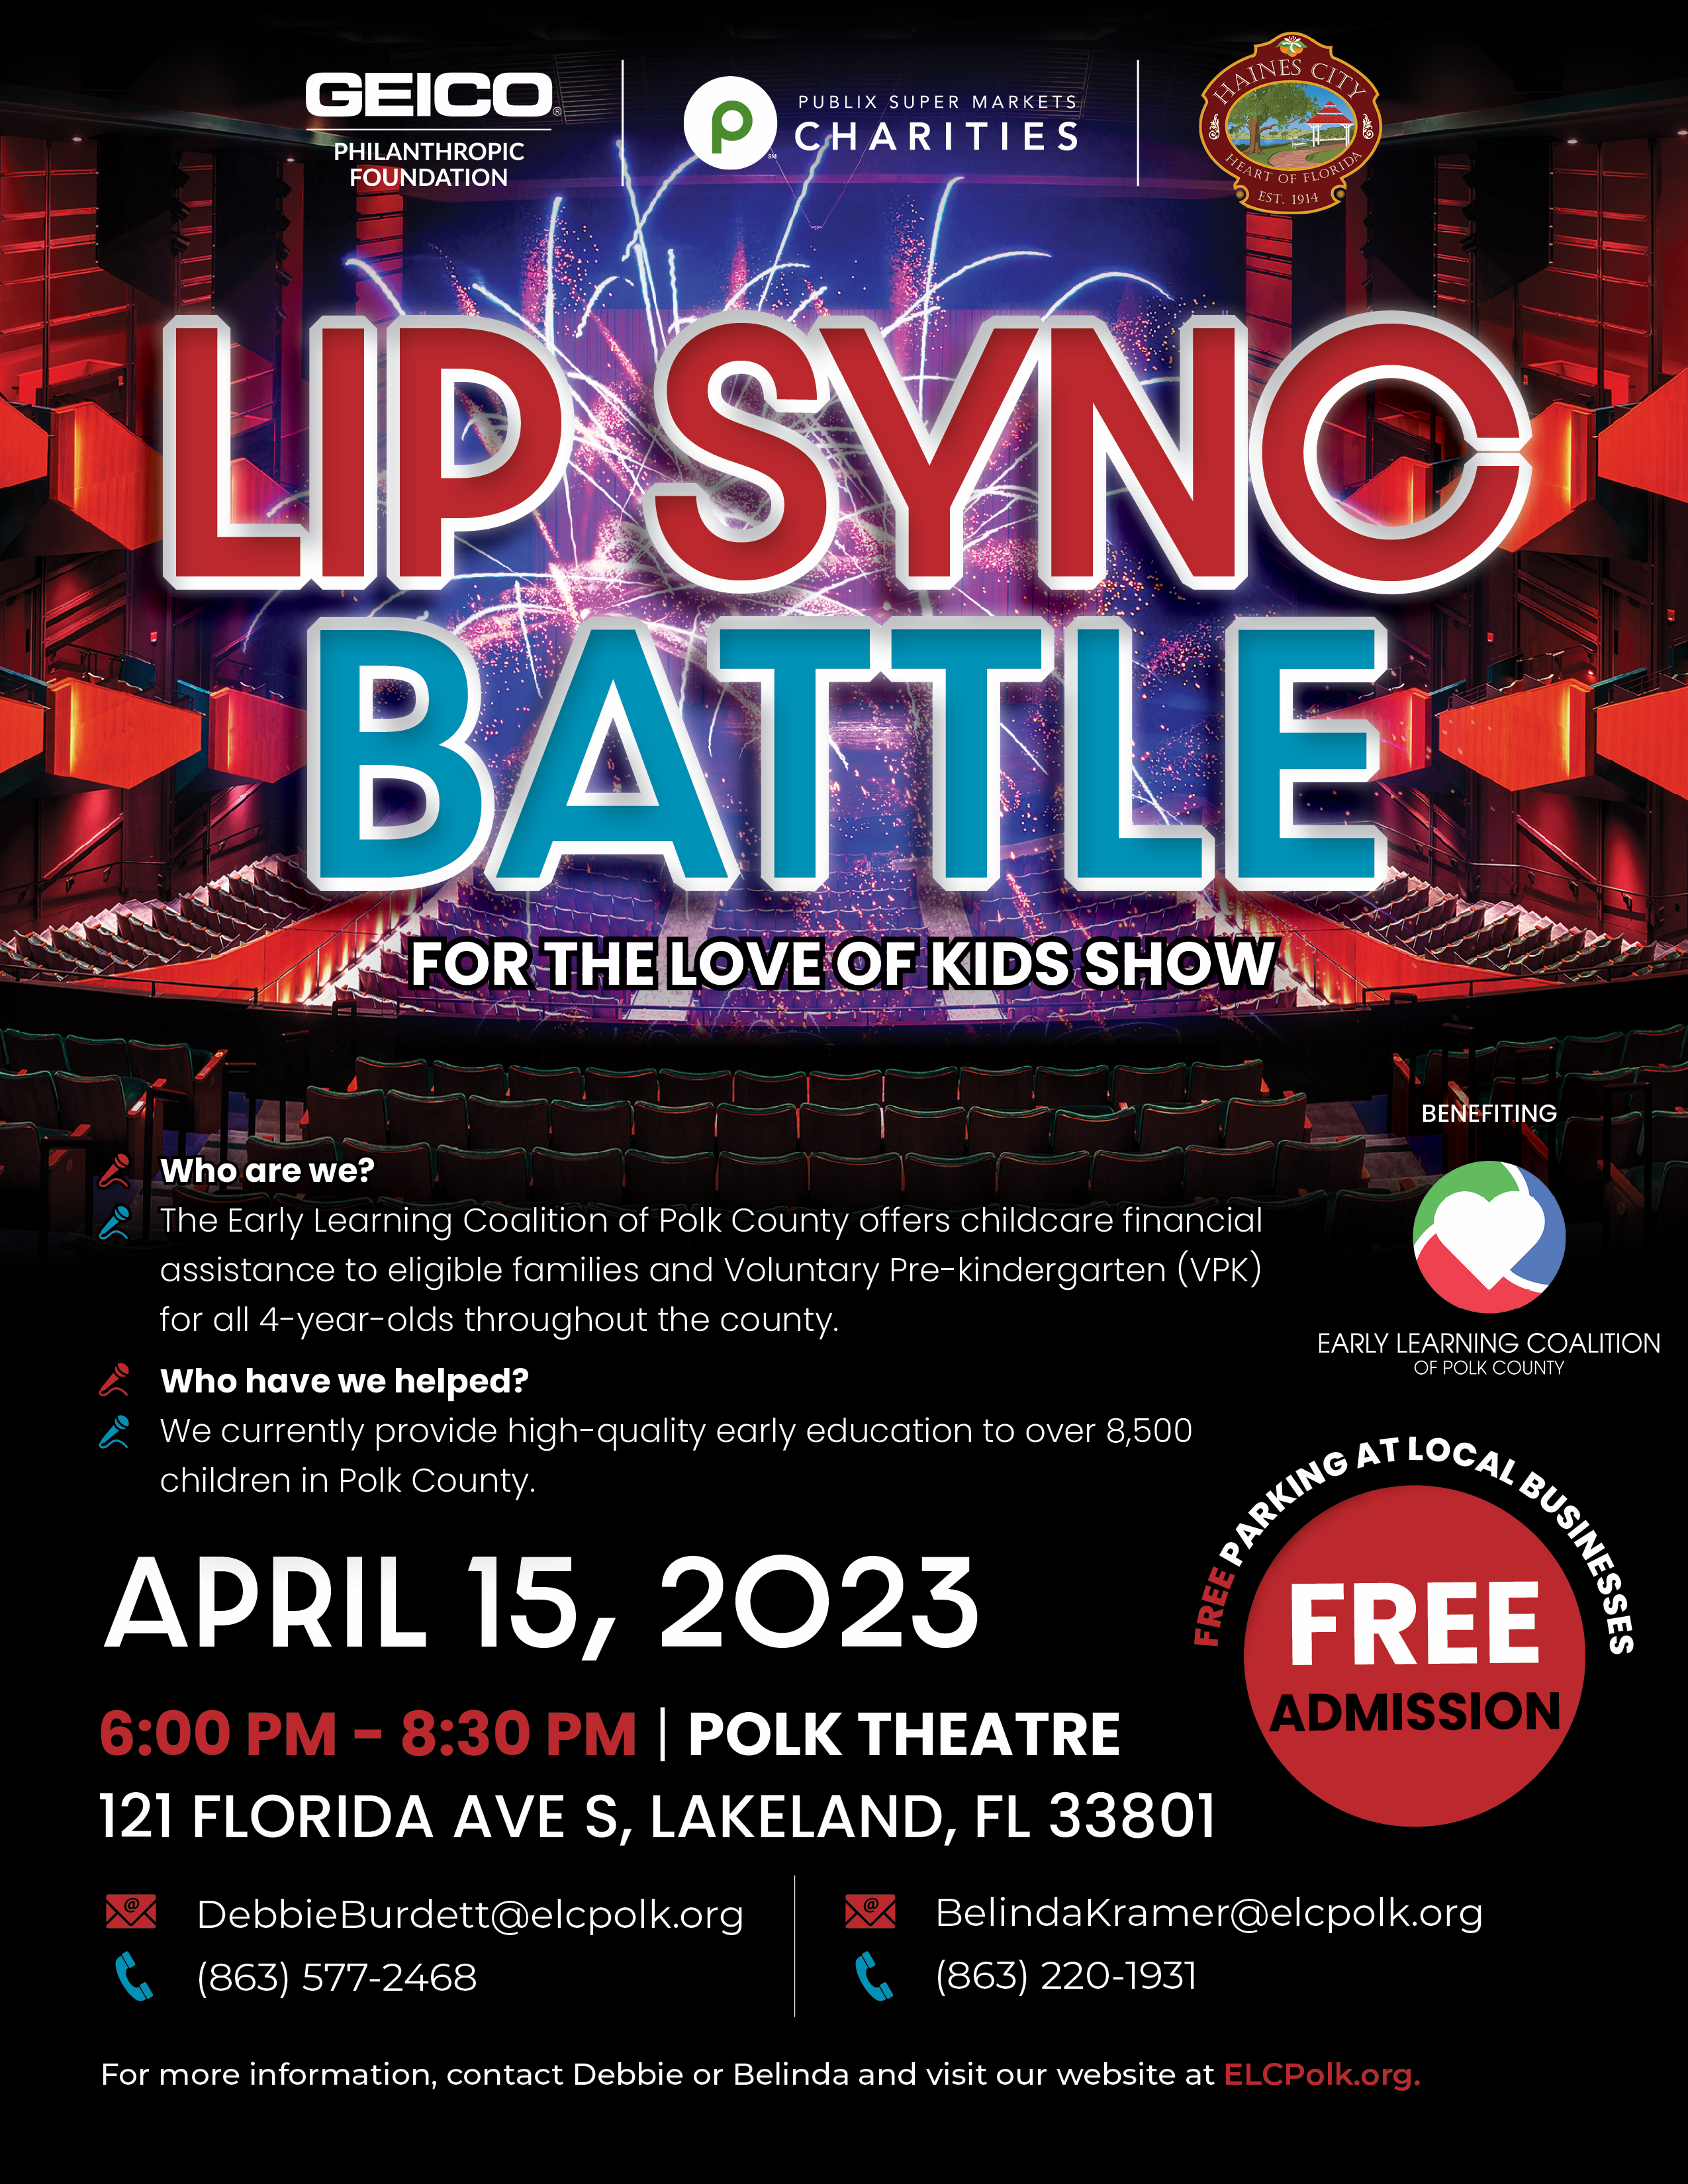 This a FREE family event presented by Publix Supermarkets Charities, GEICO Philanthropic Foundation, and City of Haines City. The event will feature some great local lip sync performers representing several local organizations who will competing for the best performance. It will be held in beautiful historic Polk Theatre and the audience along with a panel of judges will decide who will walk away with the Love of Kids trophy. Also, the first 400 attendees will receive a free gift!